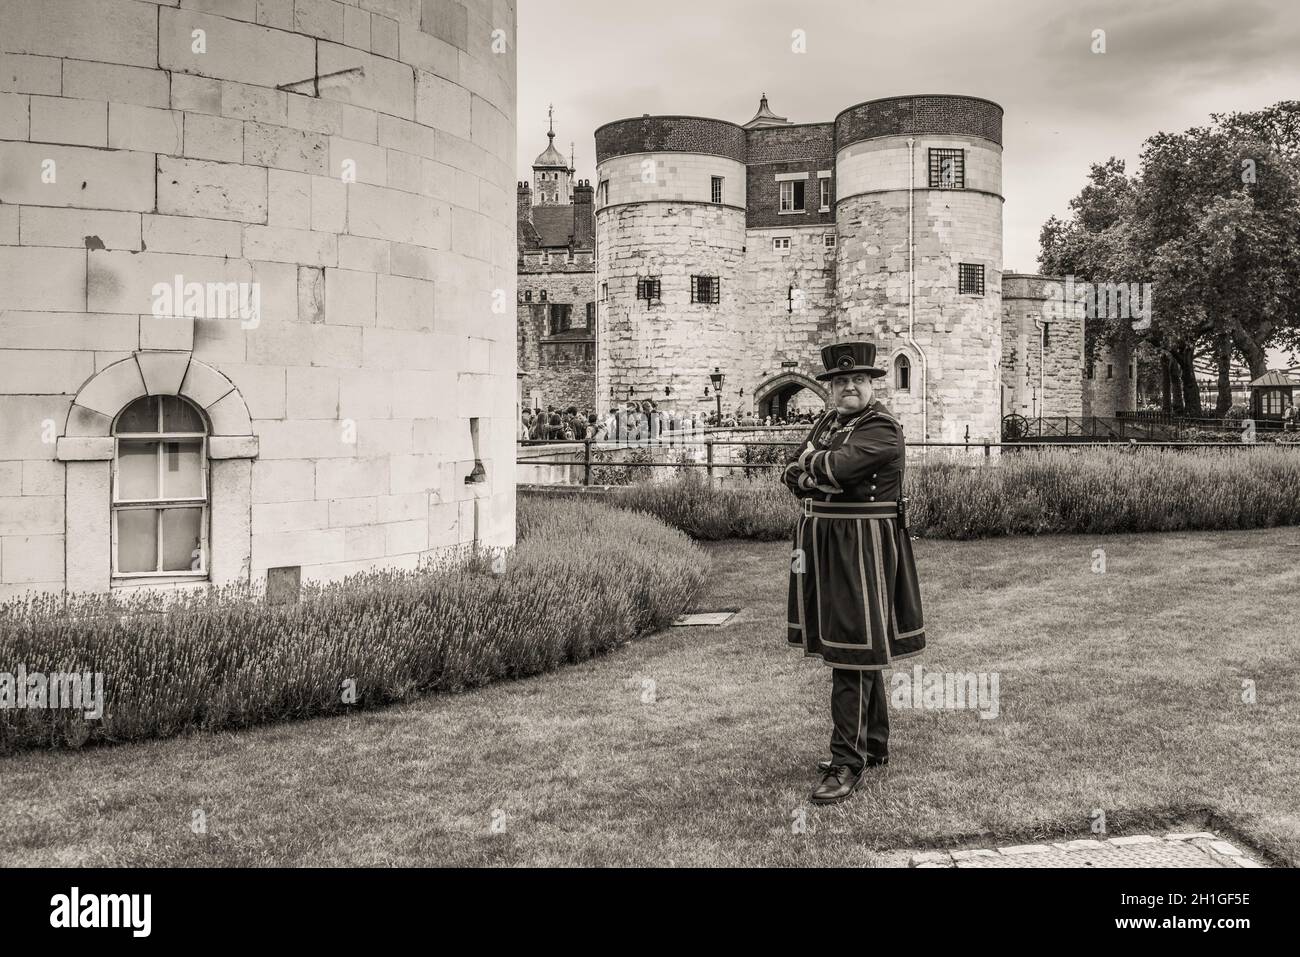 London, UK - May 23, 2017: Yeomen Warders of Tower of London (Beefeaters). Beefeaters are ceremonial guardians of the Tower of London. Monochrome sepi Stock Photo